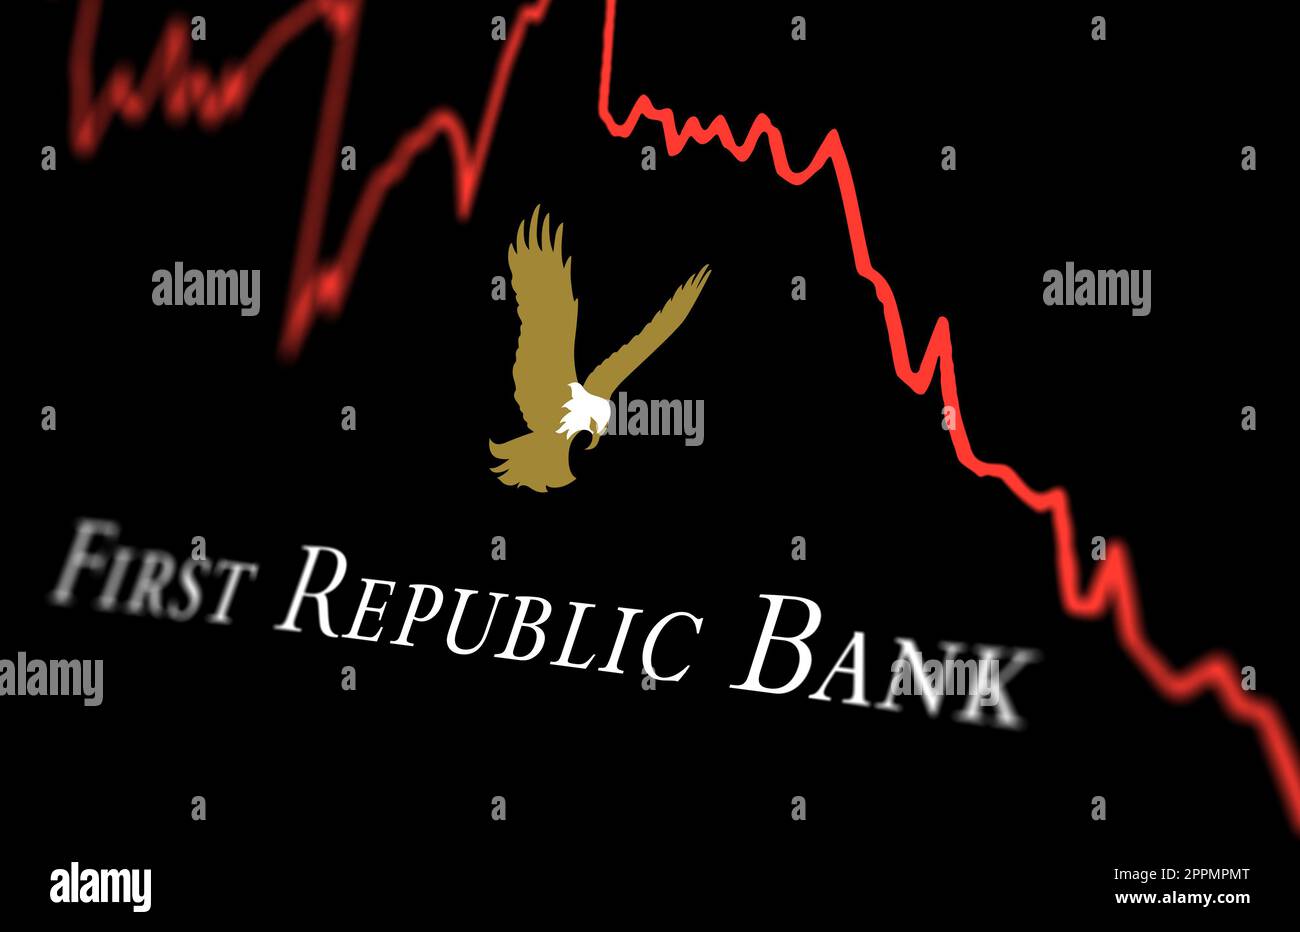 White First Republic Bank logo on a stock market performance chart trends Stock Photo